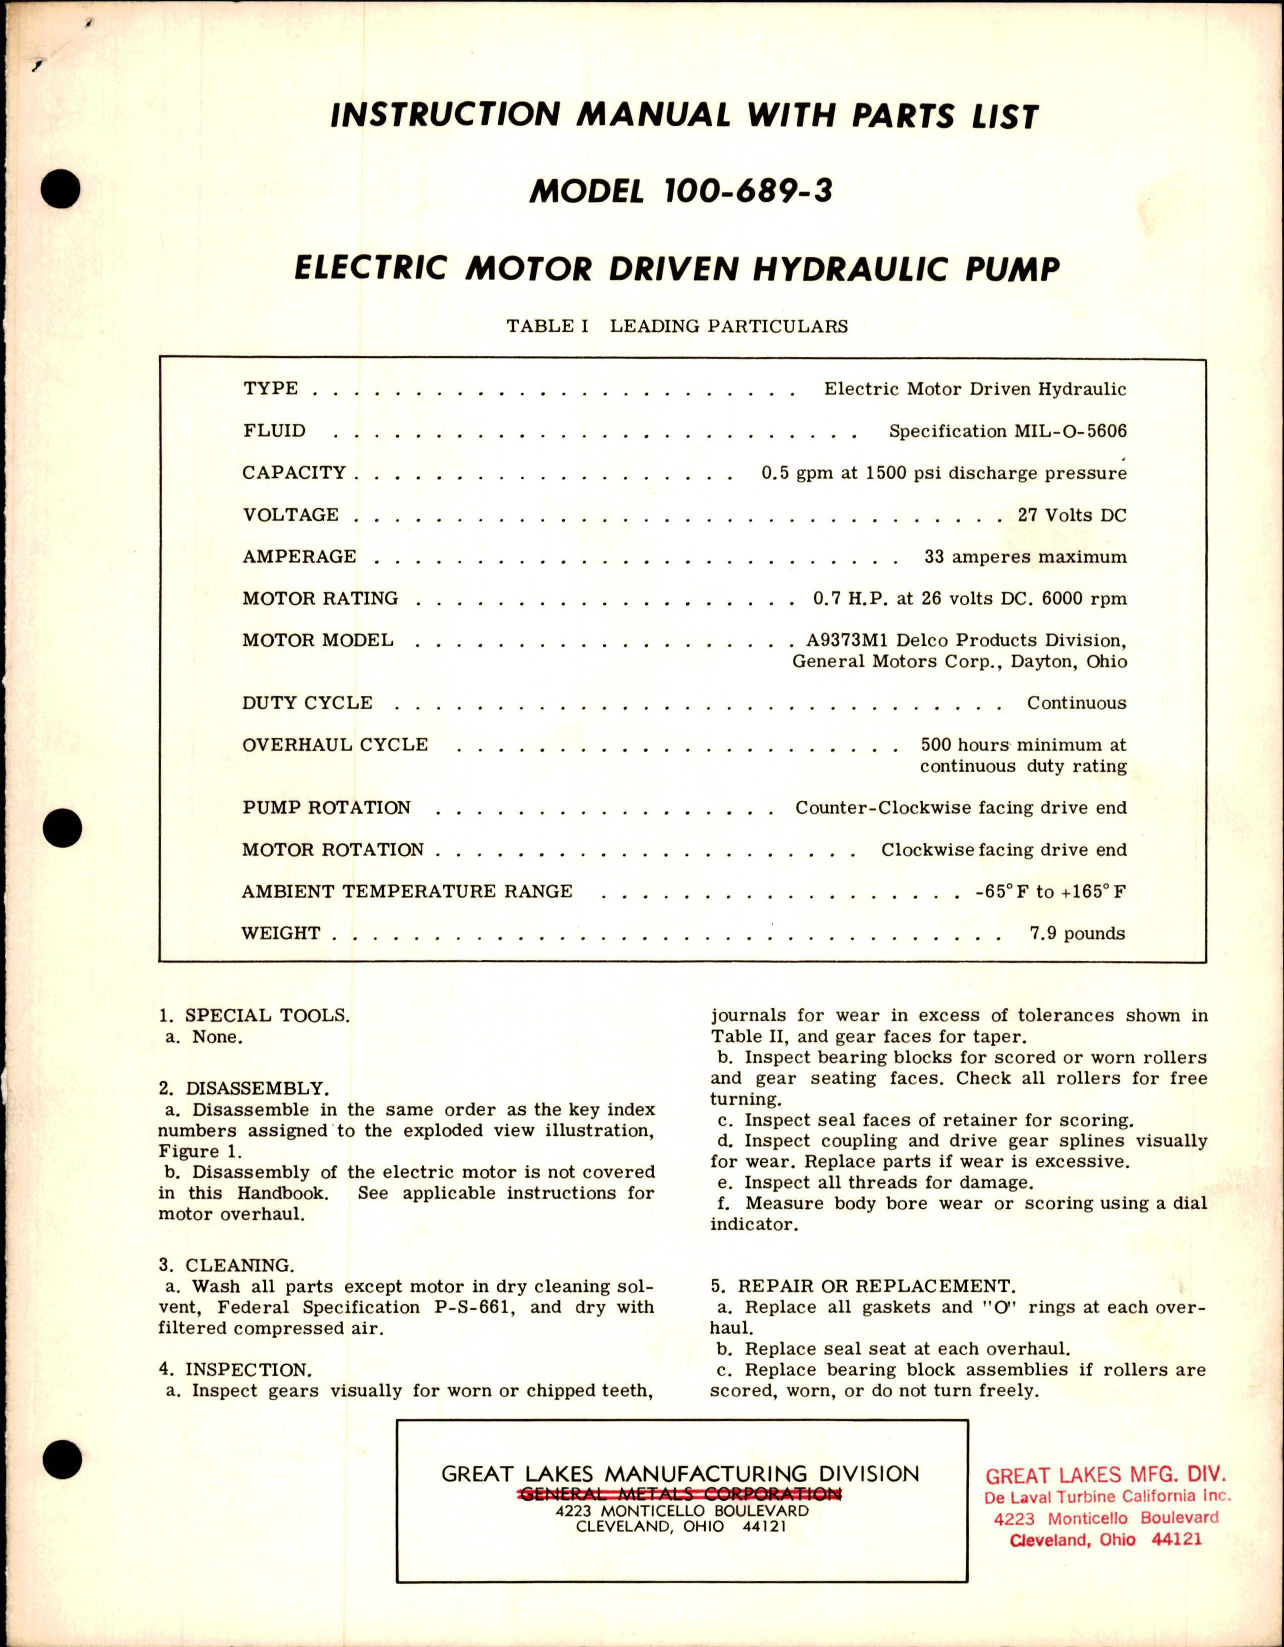 Sample page 1 from AirCorps Library document: Instruction Manual with Parts List for Electric Motor Driven Hydraulic Pump - Model 100-689-3 